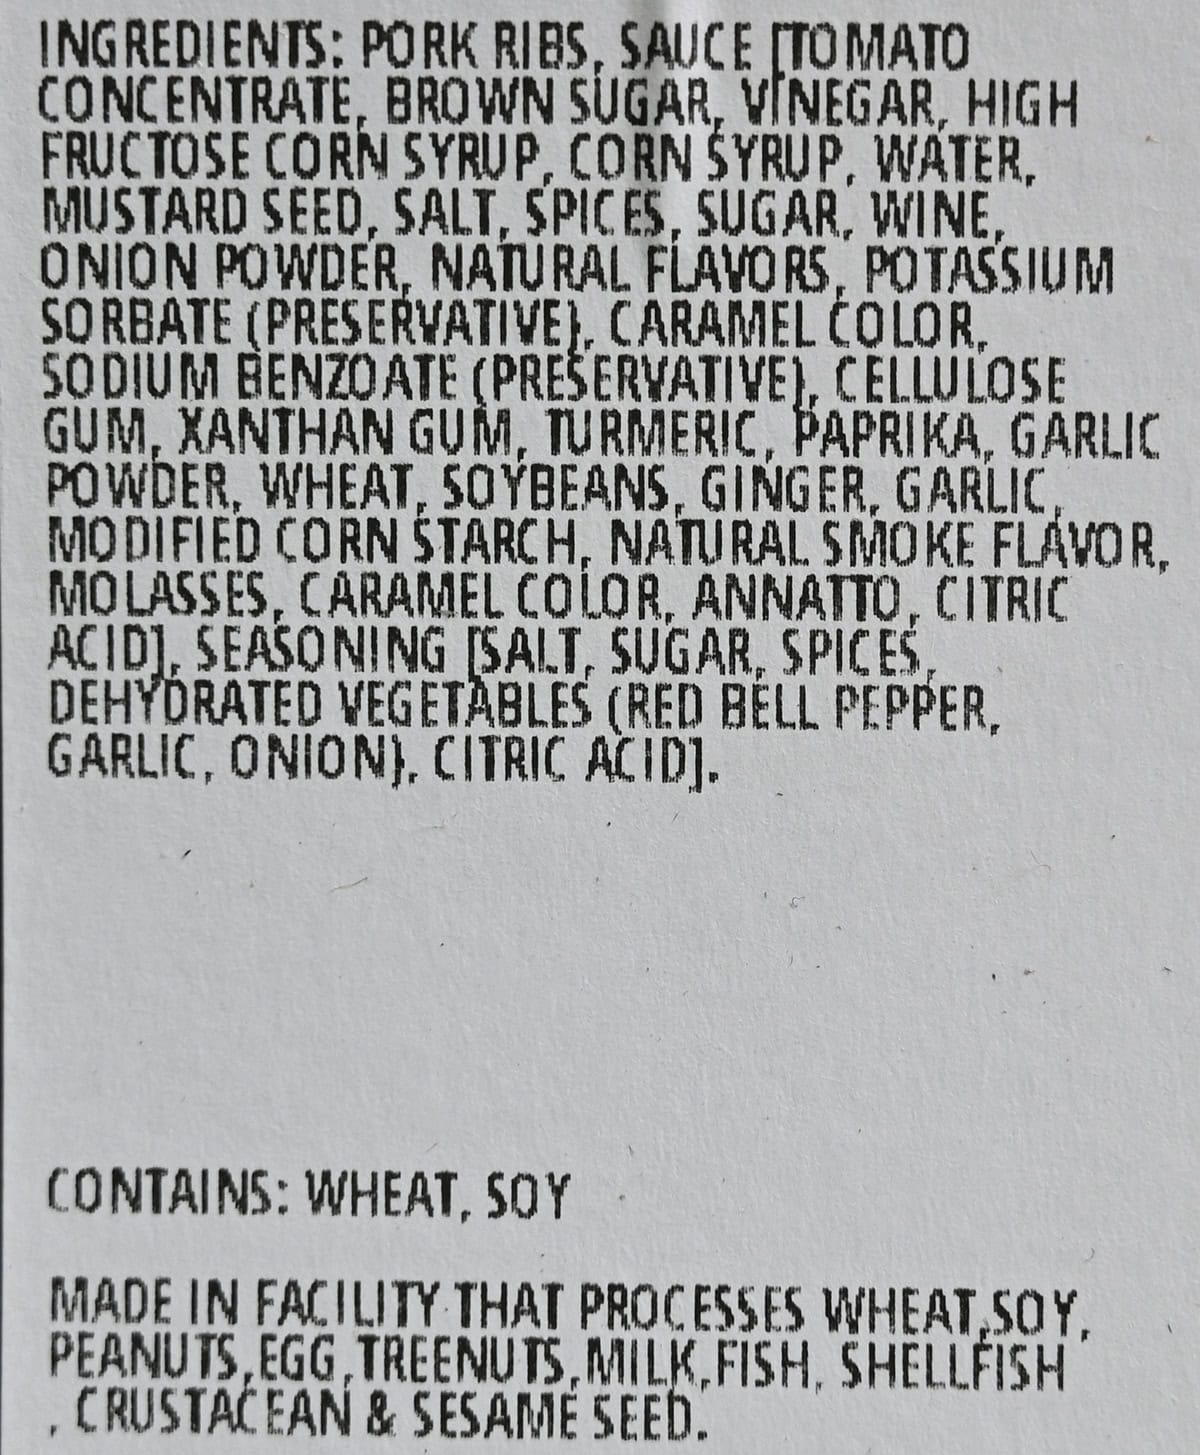 Image of the ingredients list for the ribs from the back of container.